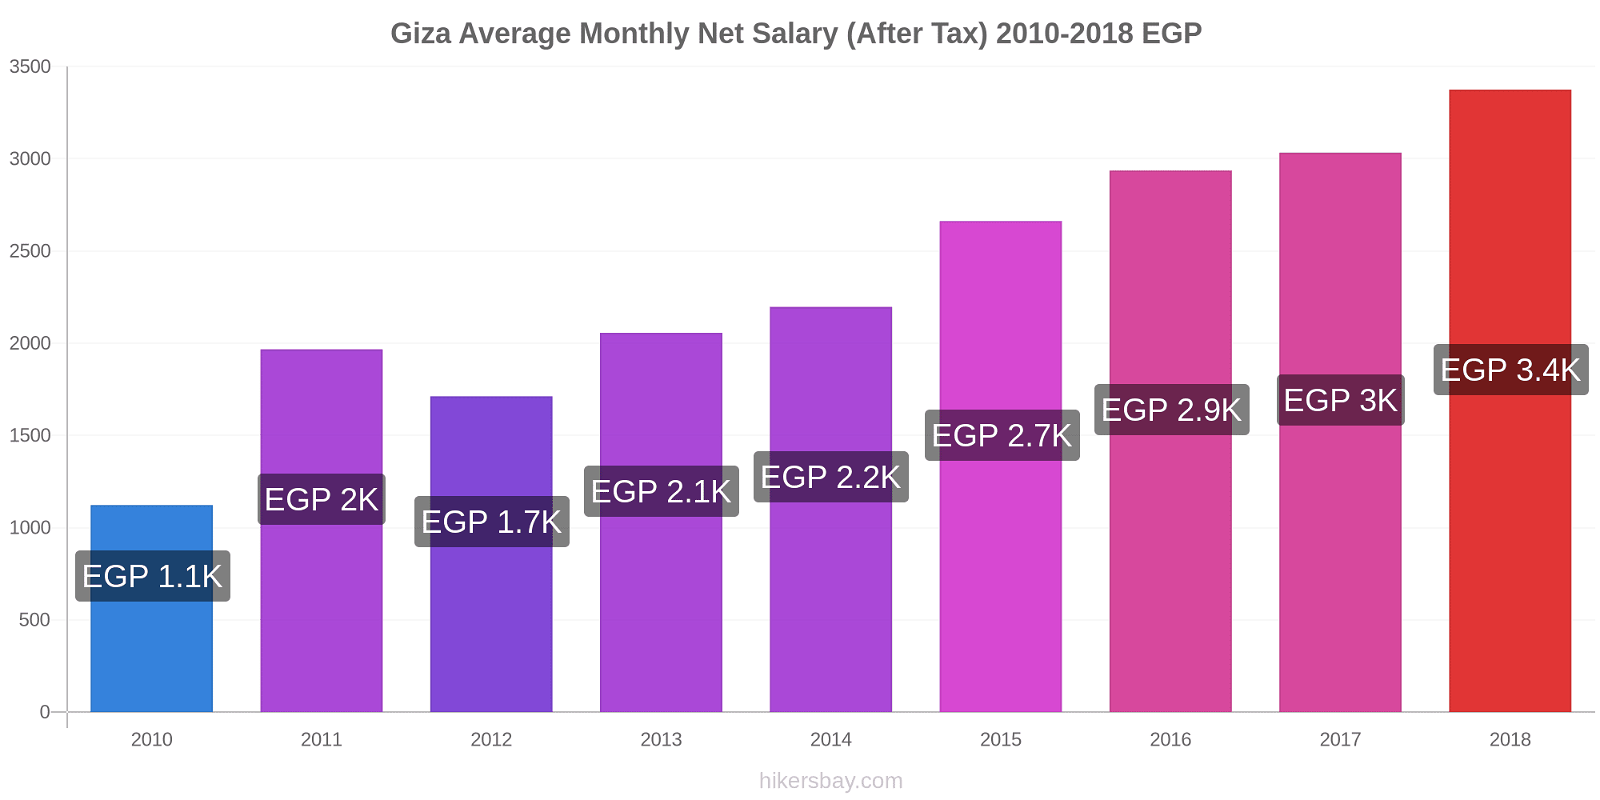 Giza price changes Average Monthly Net Salary (After Tax) hikersbay.com